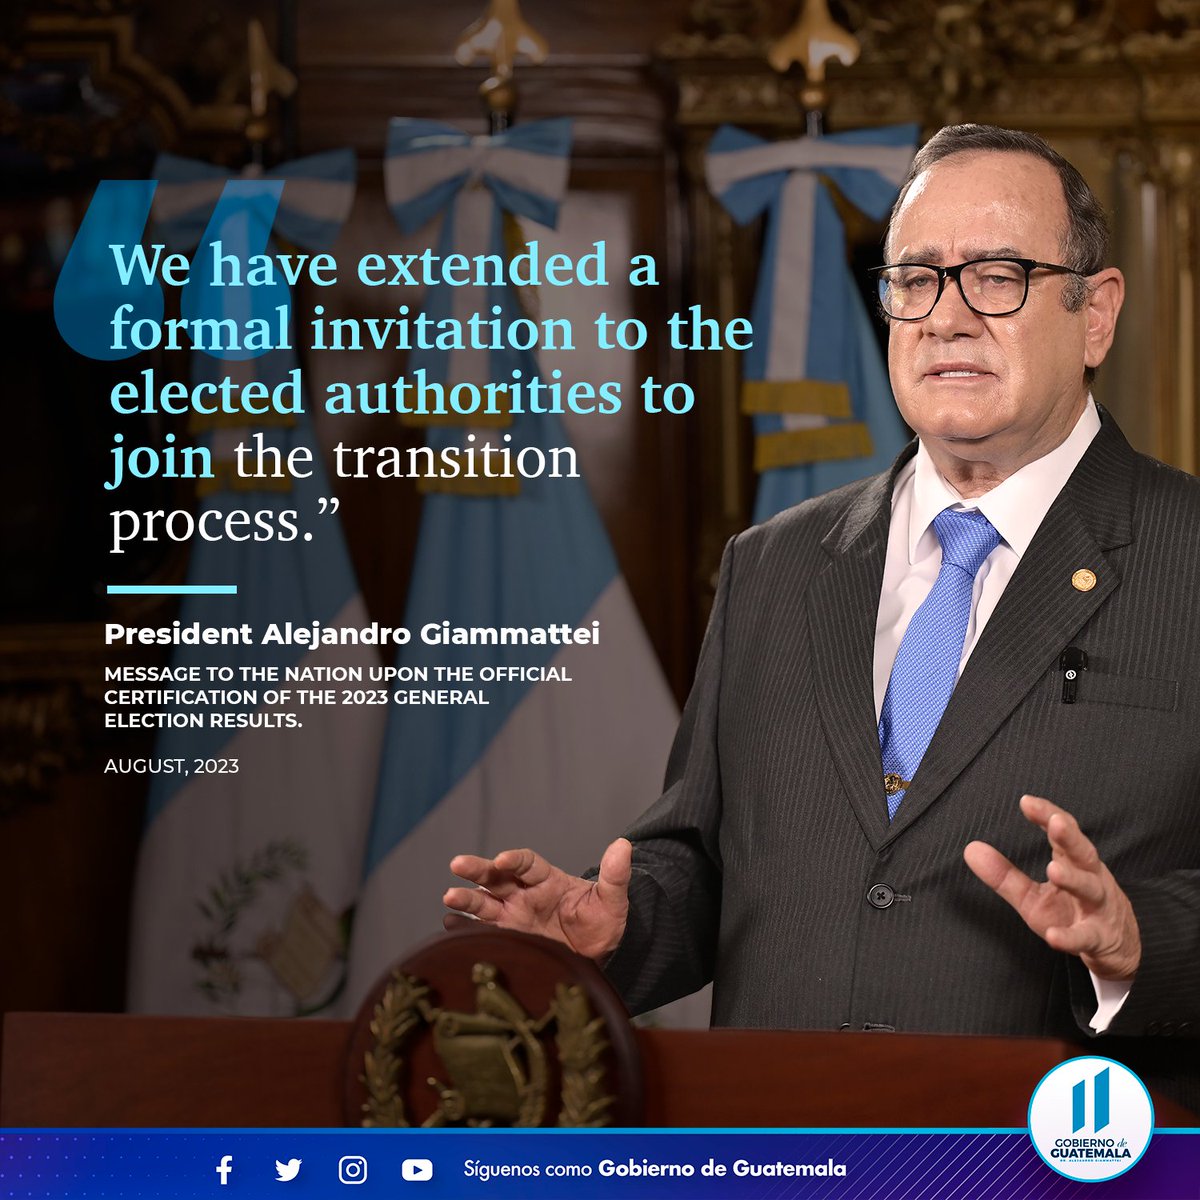 Message to the nation upon the official certification of the 2023 general elections results.

#EleccionesGT2023 #ElectionsGt2023